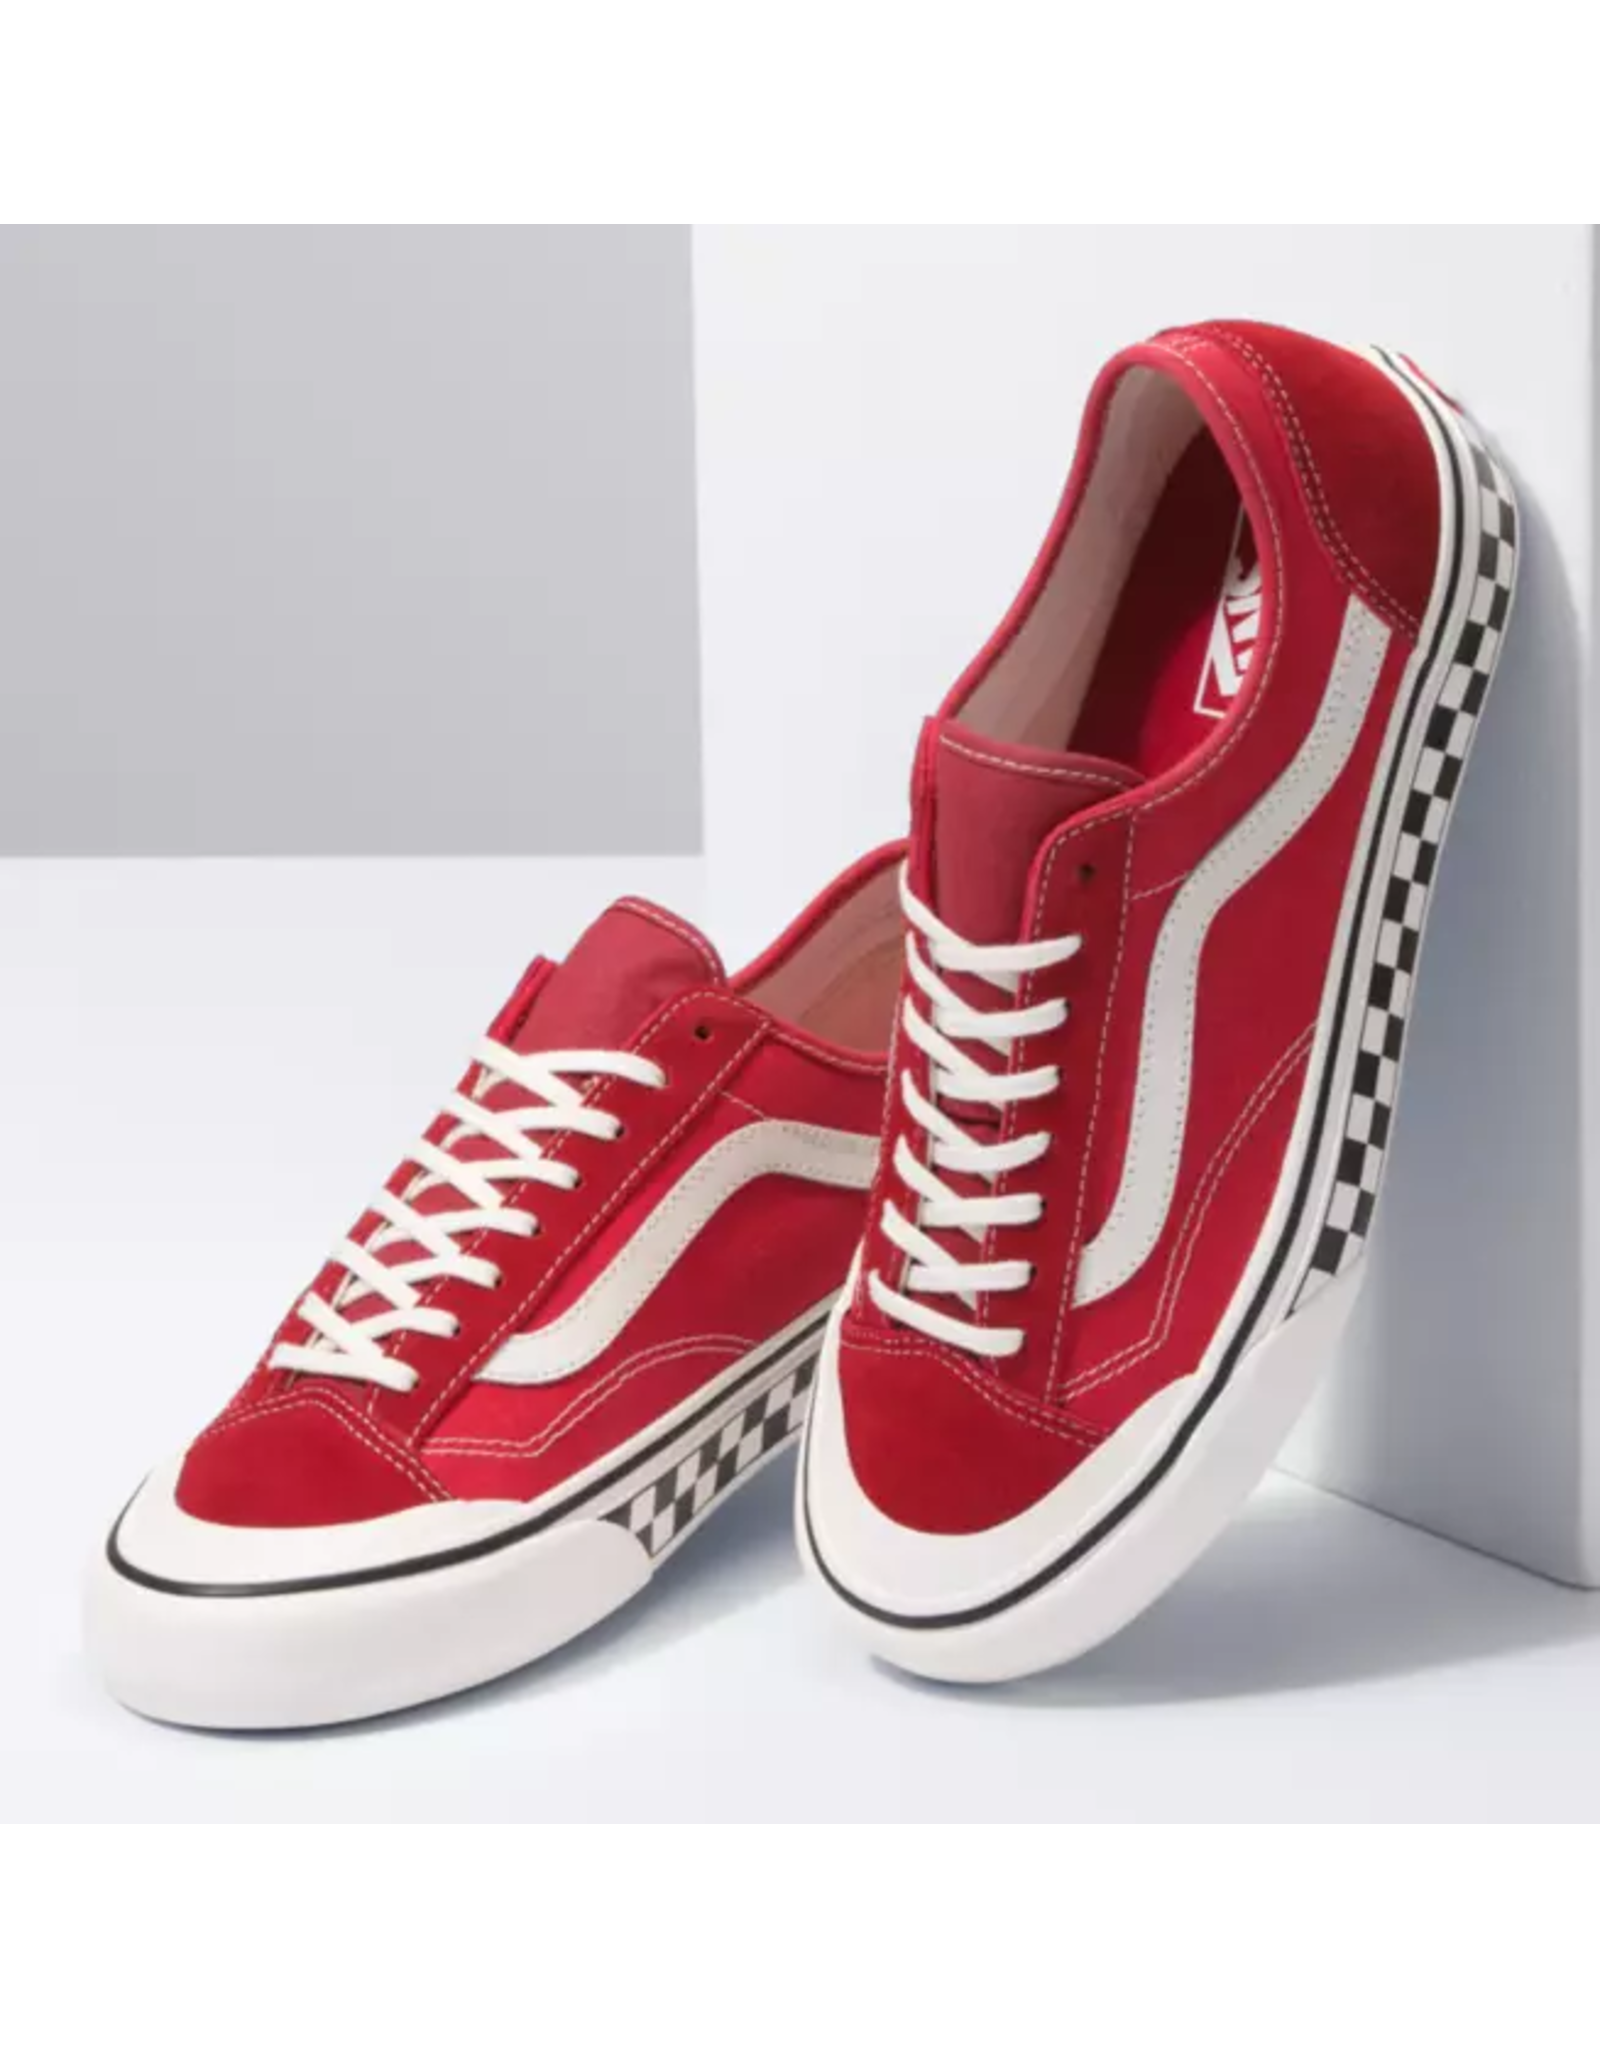 red vans style